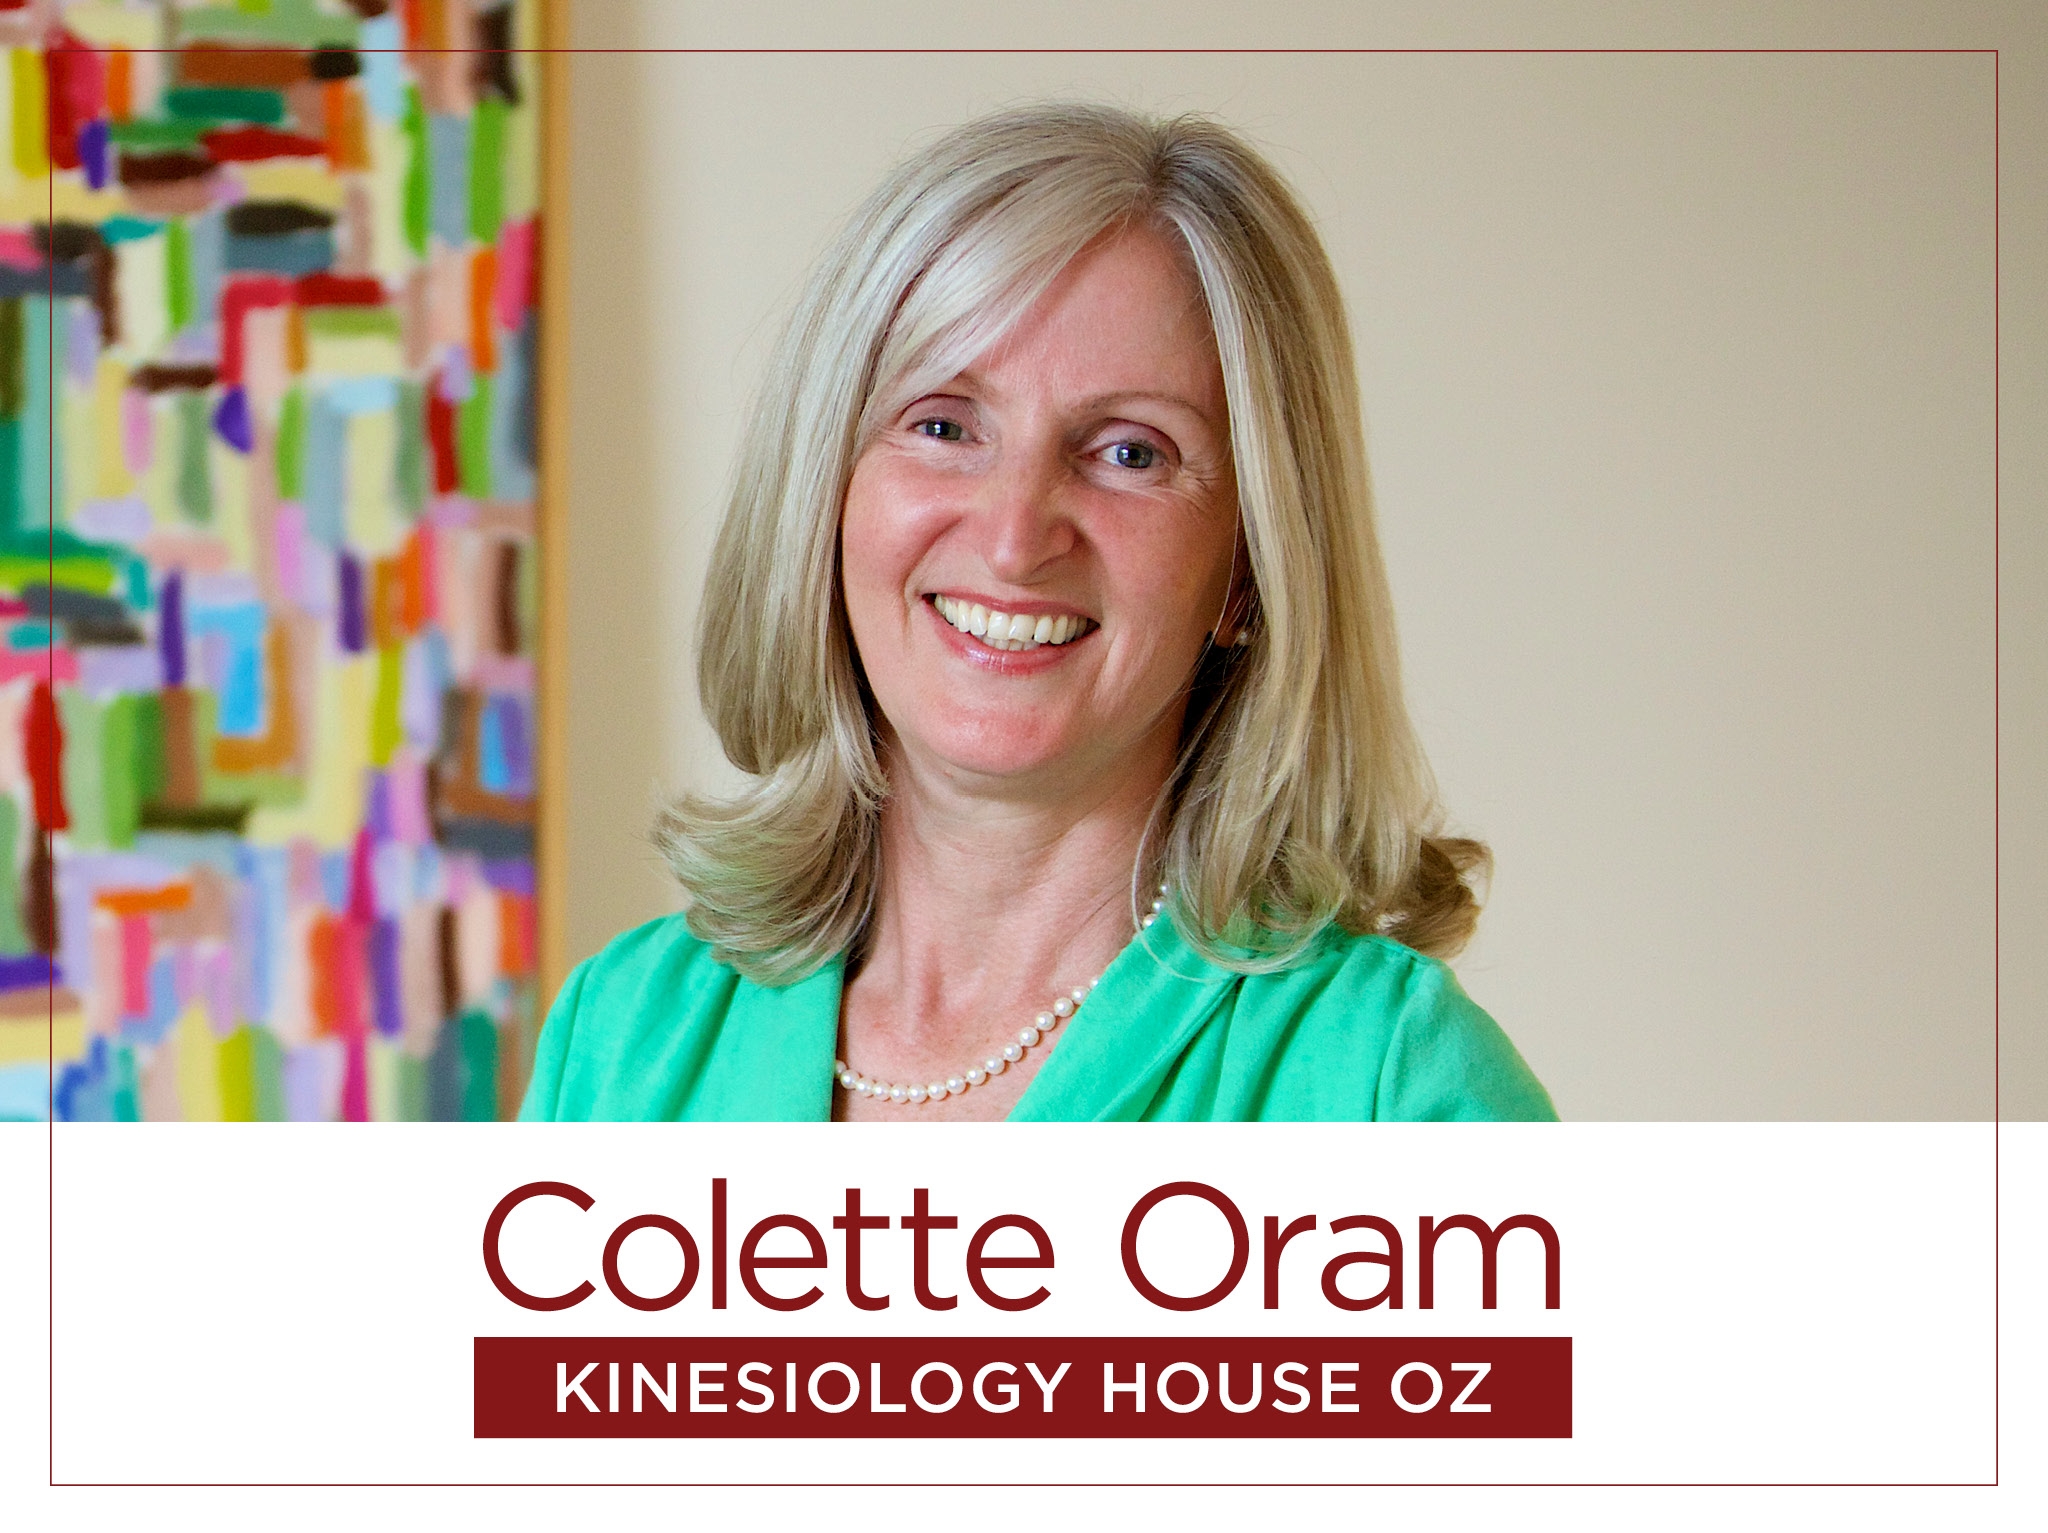 Colette Oram therapist on Natural Therapy Pages